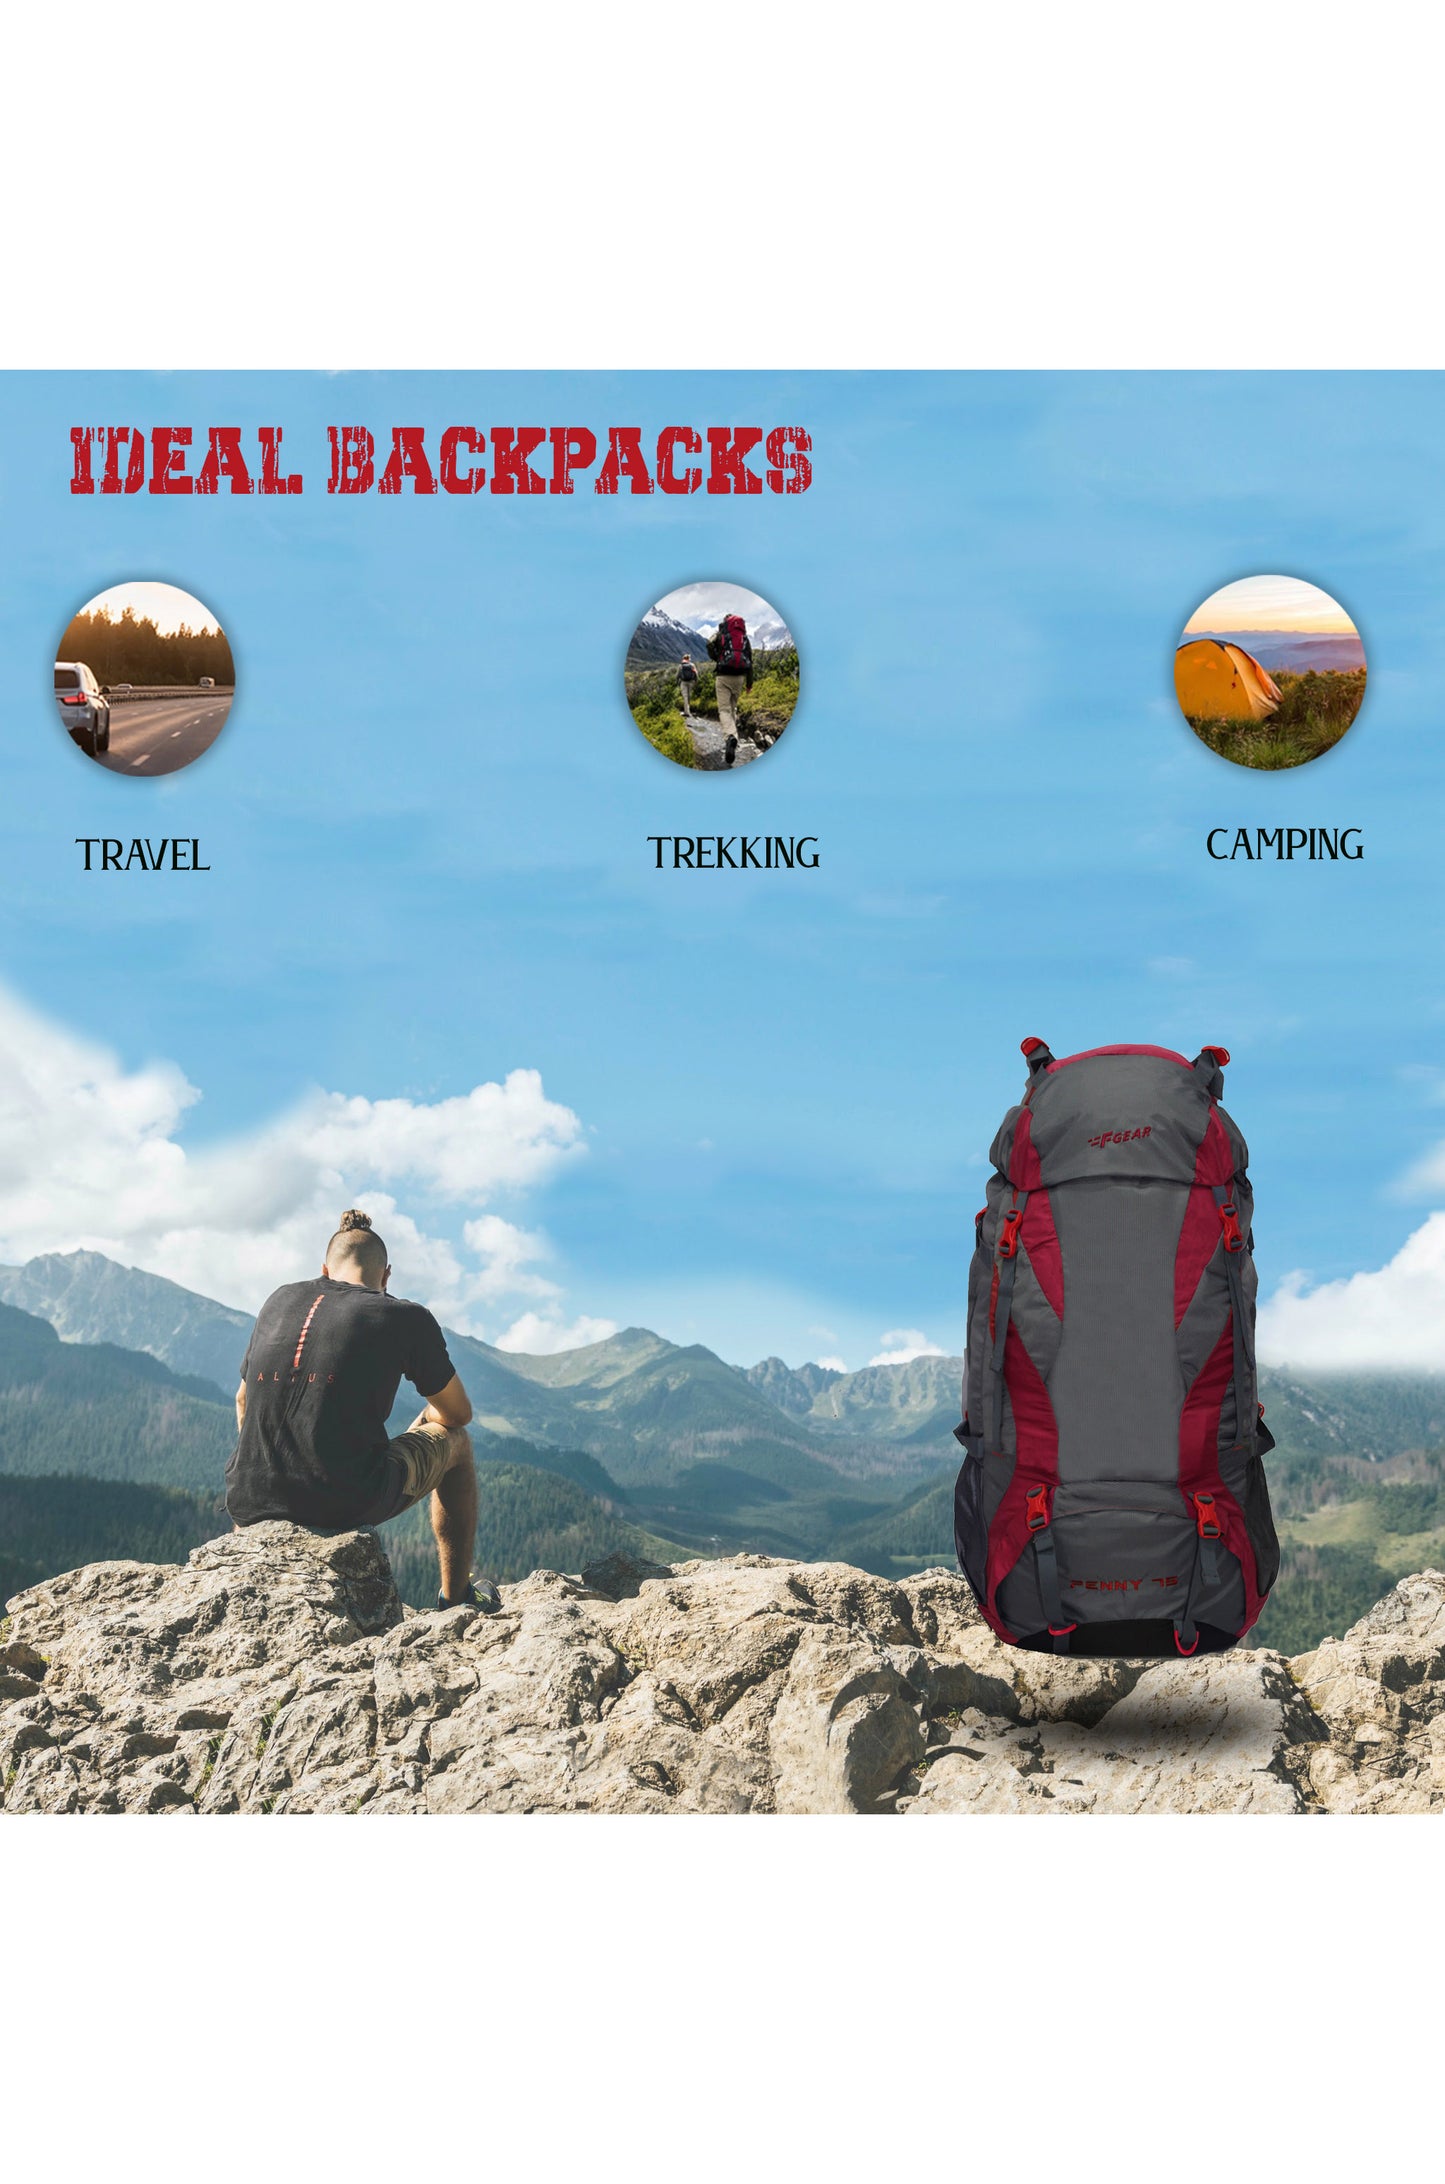 Penny 75L Red Gry Rucksack with Rain Cover